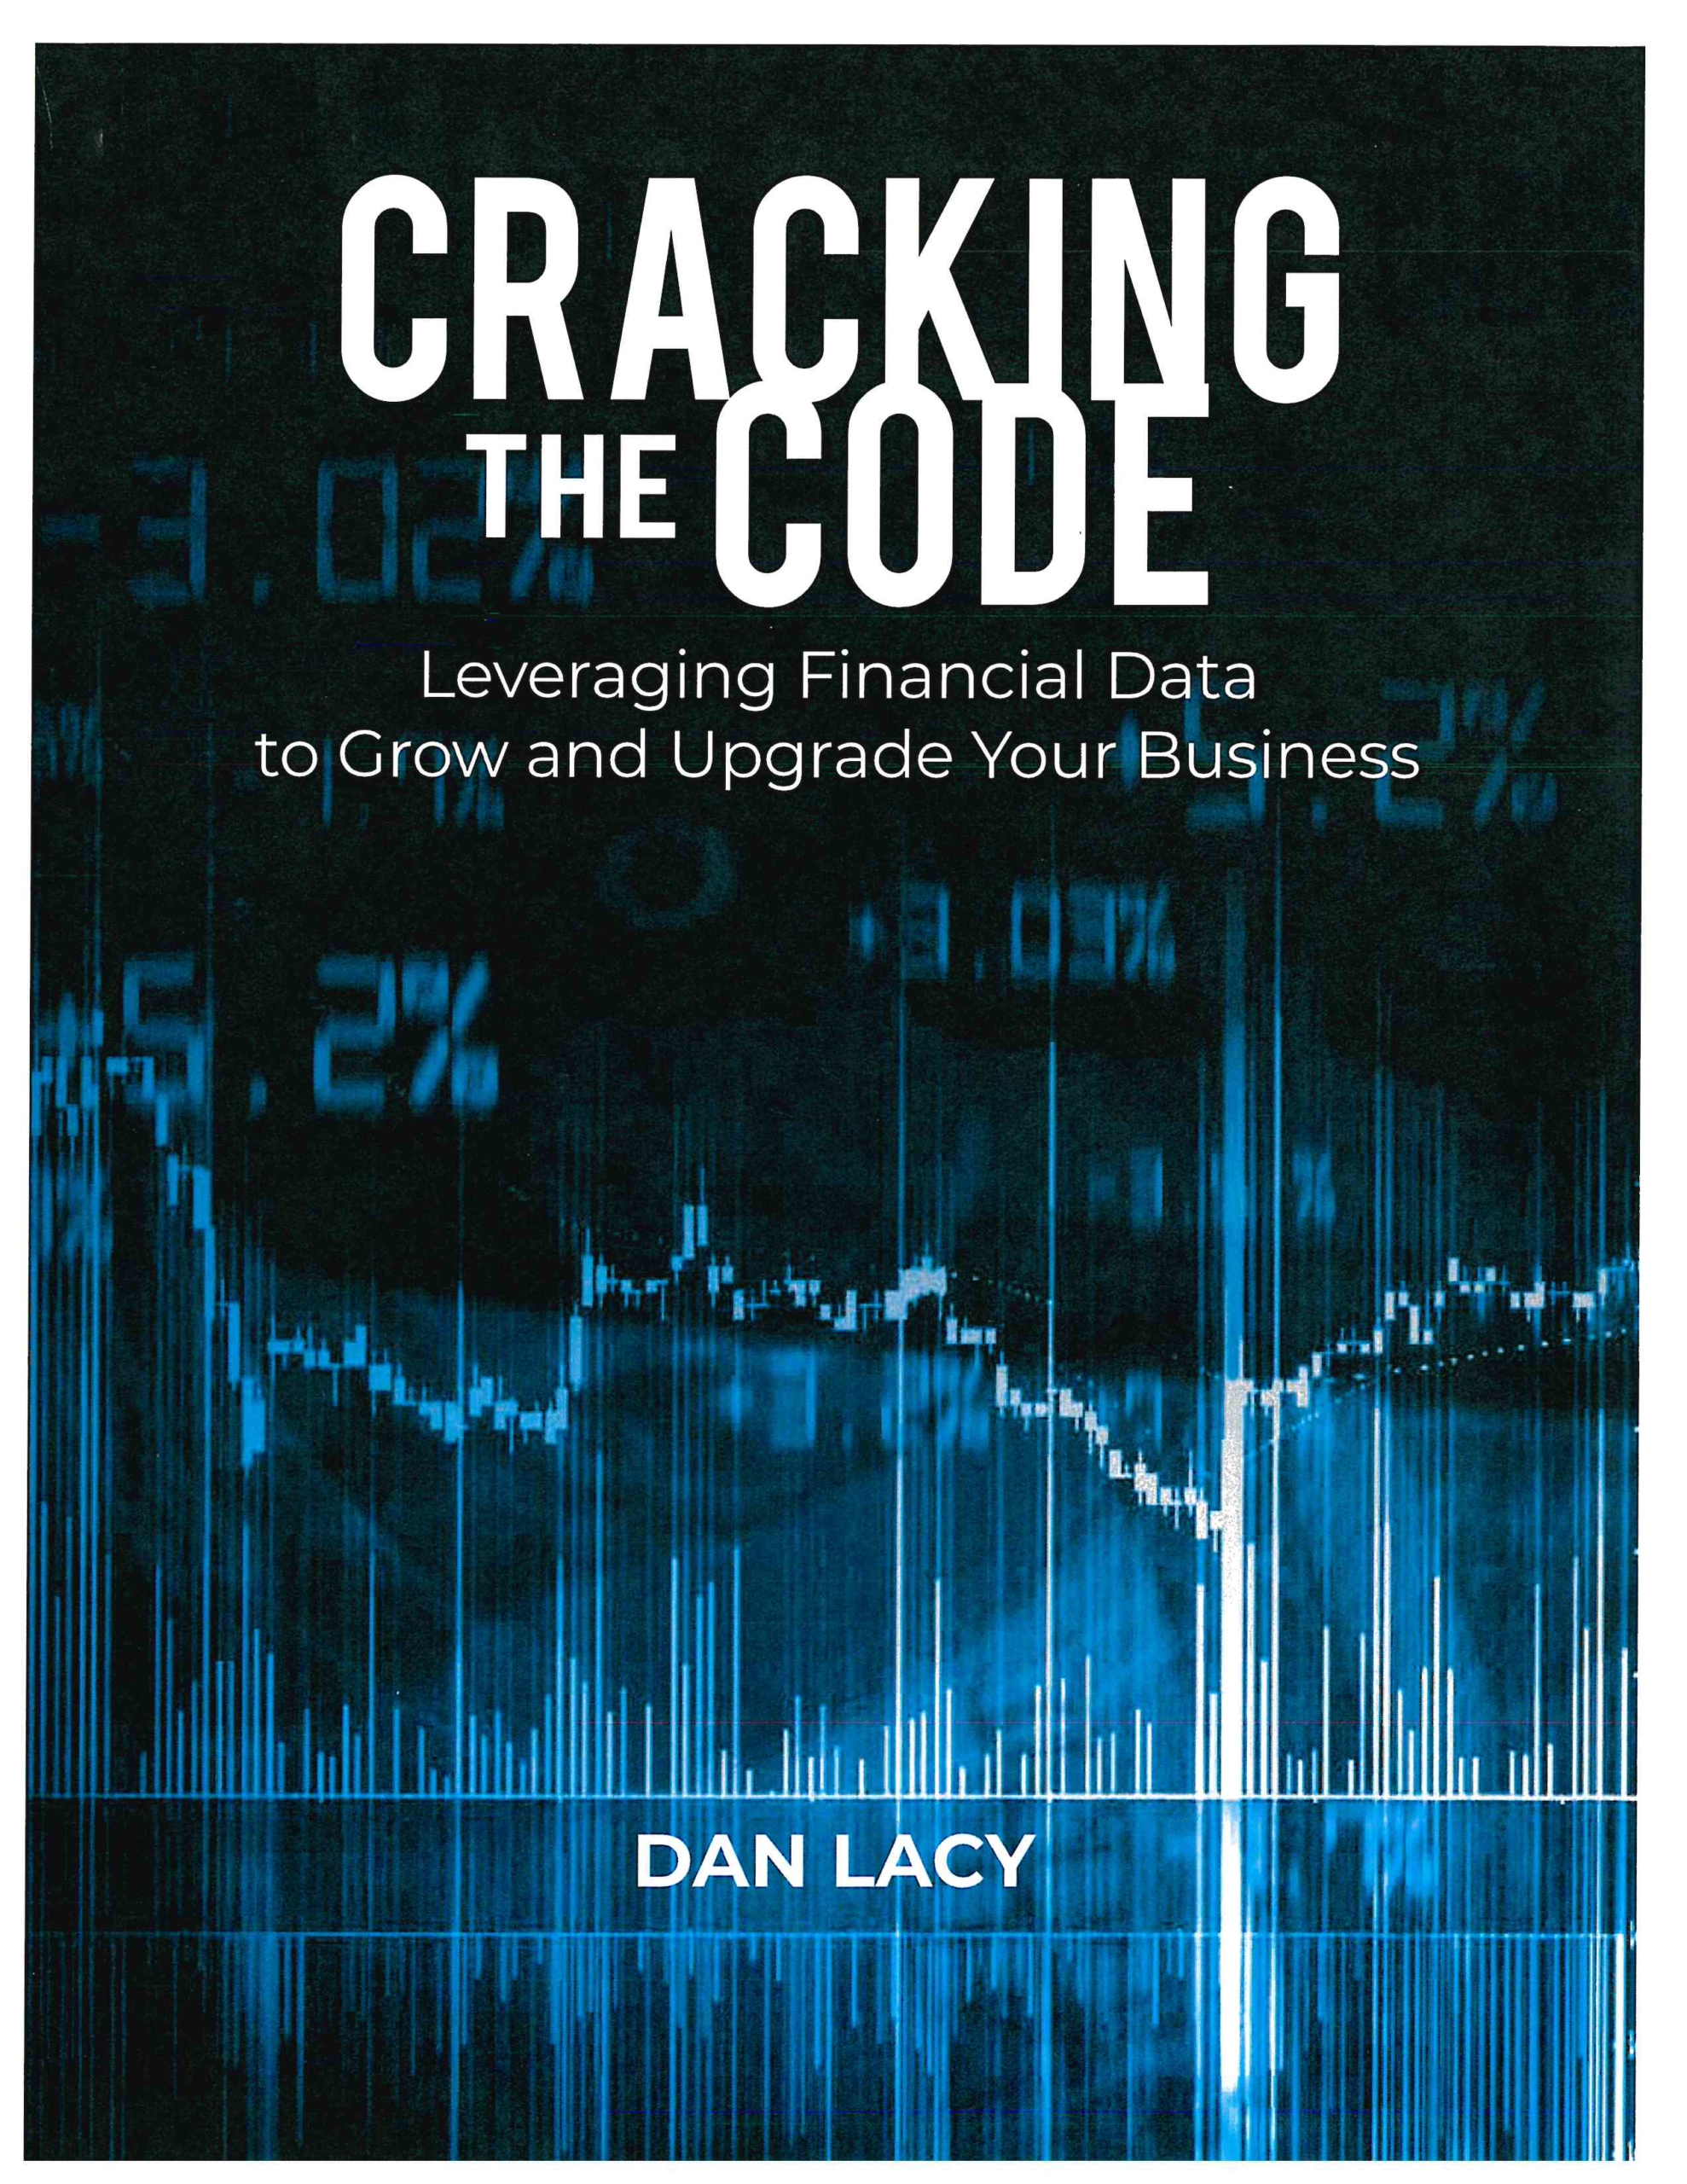 cracking the code 3rd edition pdf download